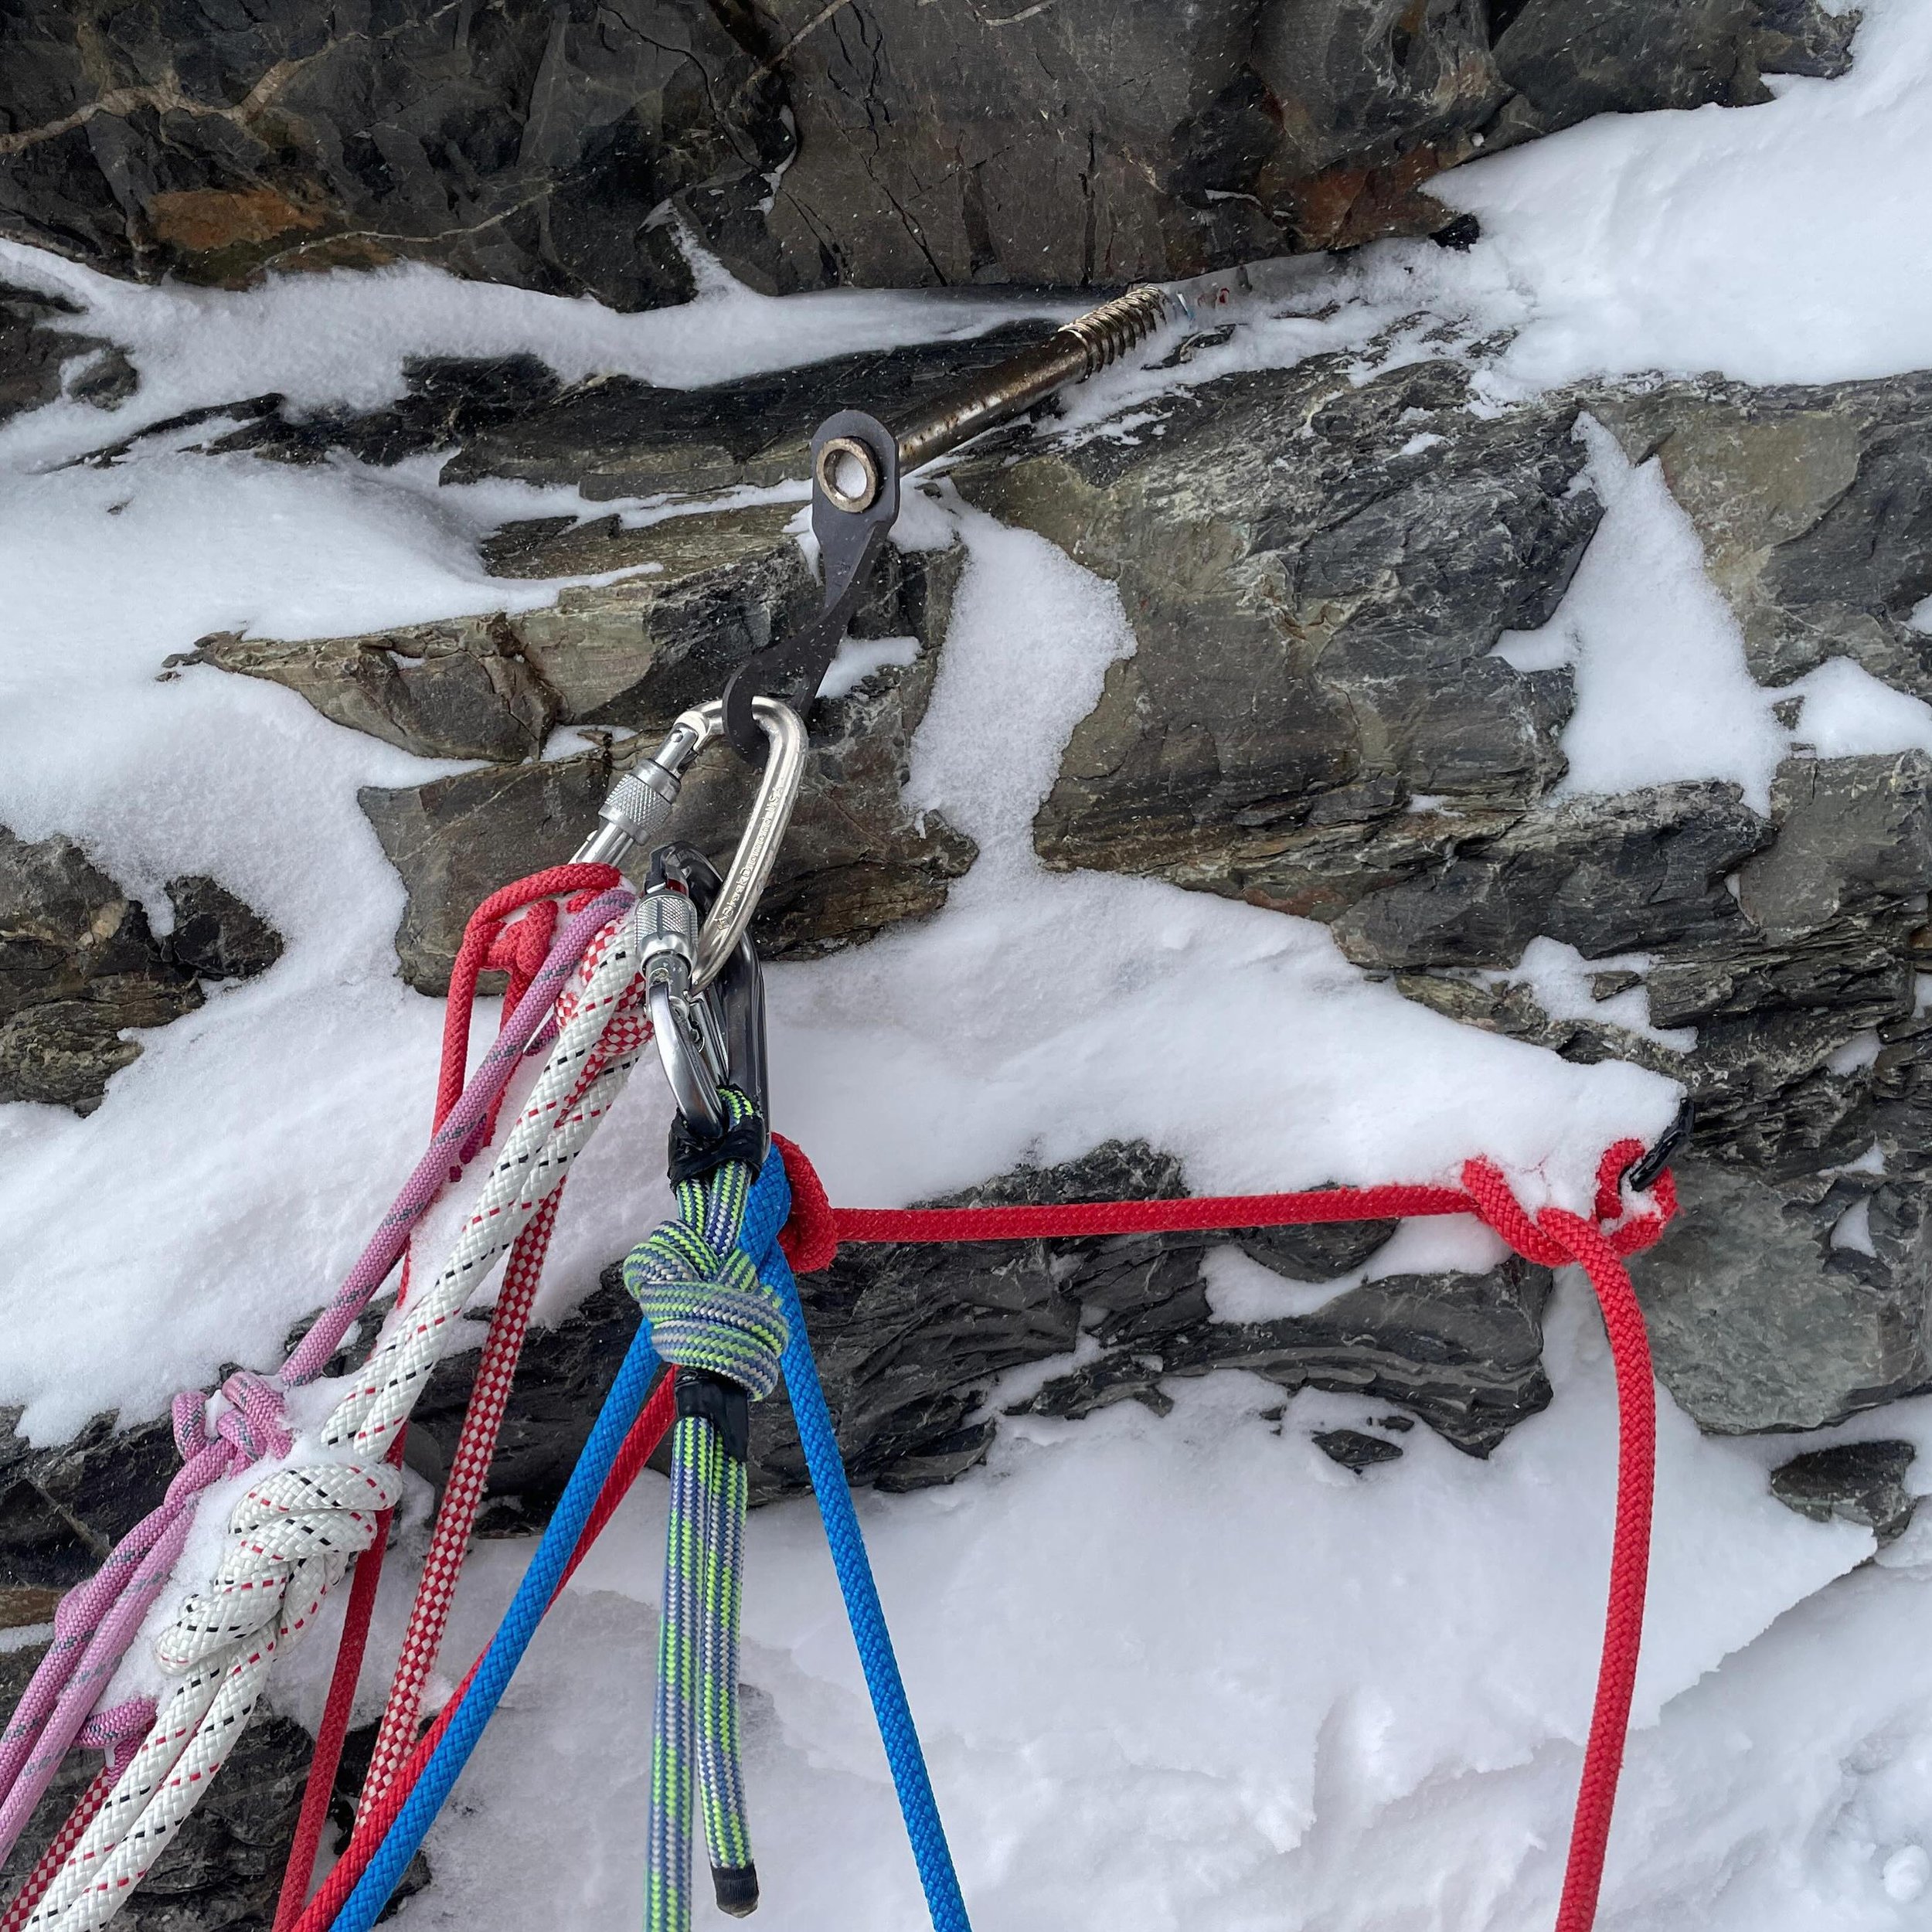 A guest #anchoroftheday from my friend @mountexpeds 

This one was too good not to share 😂 Why use a &pound;10 piton at 8000m when you can hammer in a &pound;70 ice screw? Who&rsquo;s gonna whip 🤢

#buildbetterbelays #techtip #climbinganchor #mount